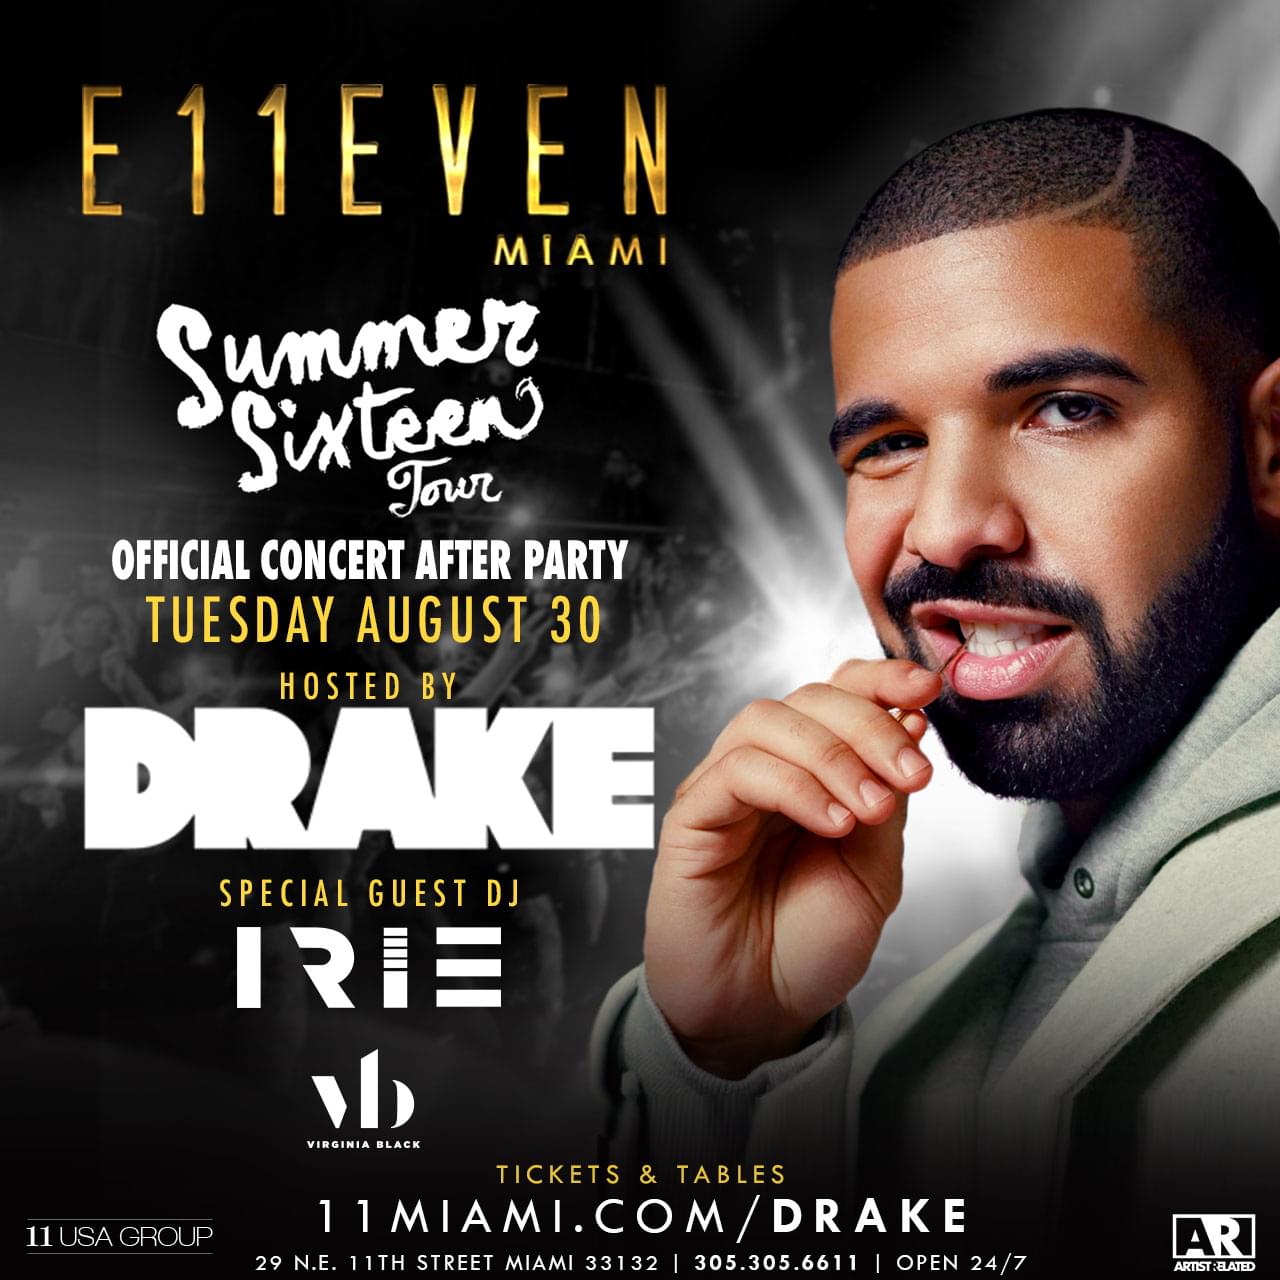 DRAKE OFFICIAL CONCERT AFTER PARTY DAY 1 Tickets at E11EVEN Miami in